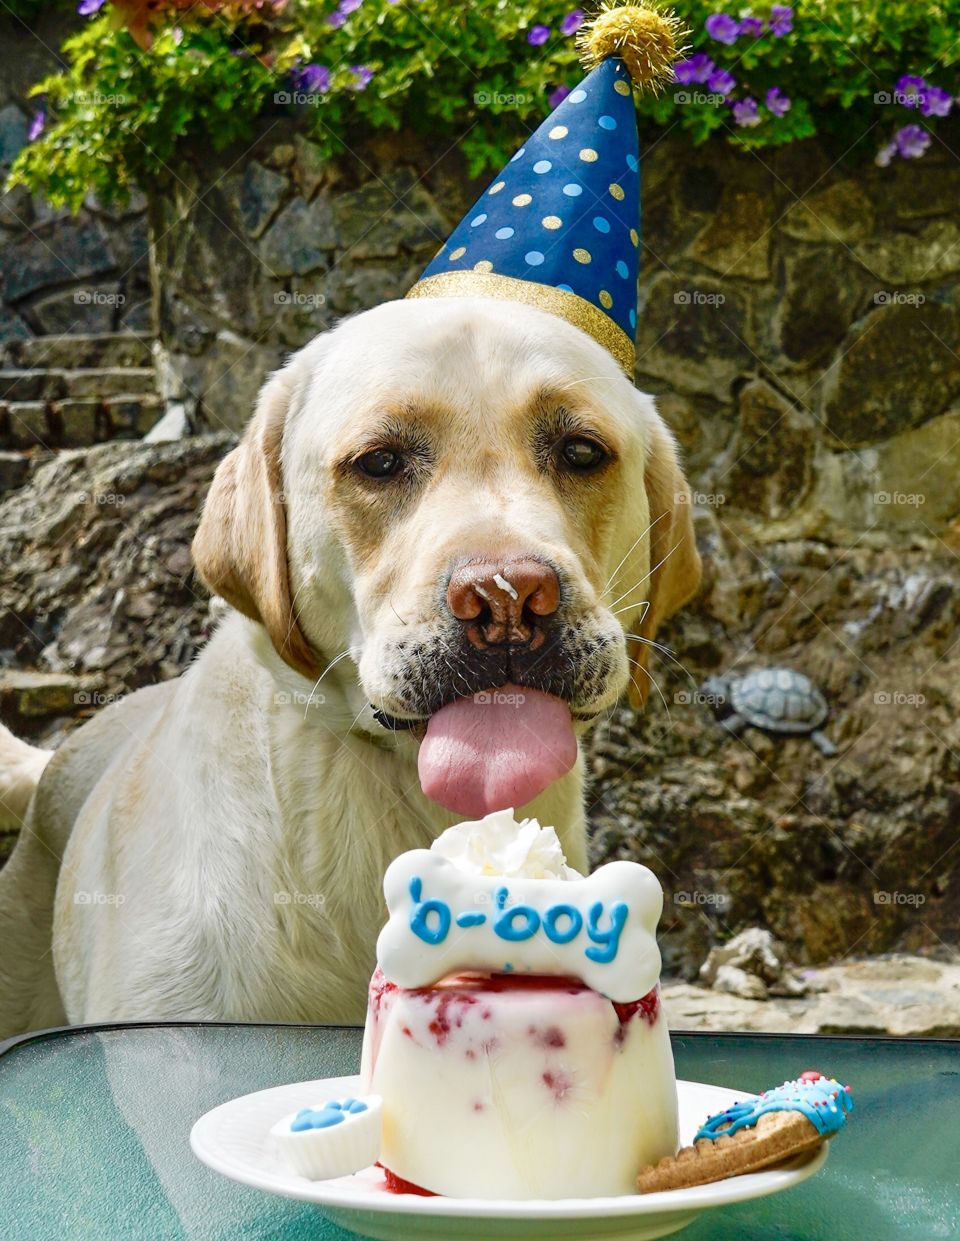 Birthday party for a special dog - cake and party hat